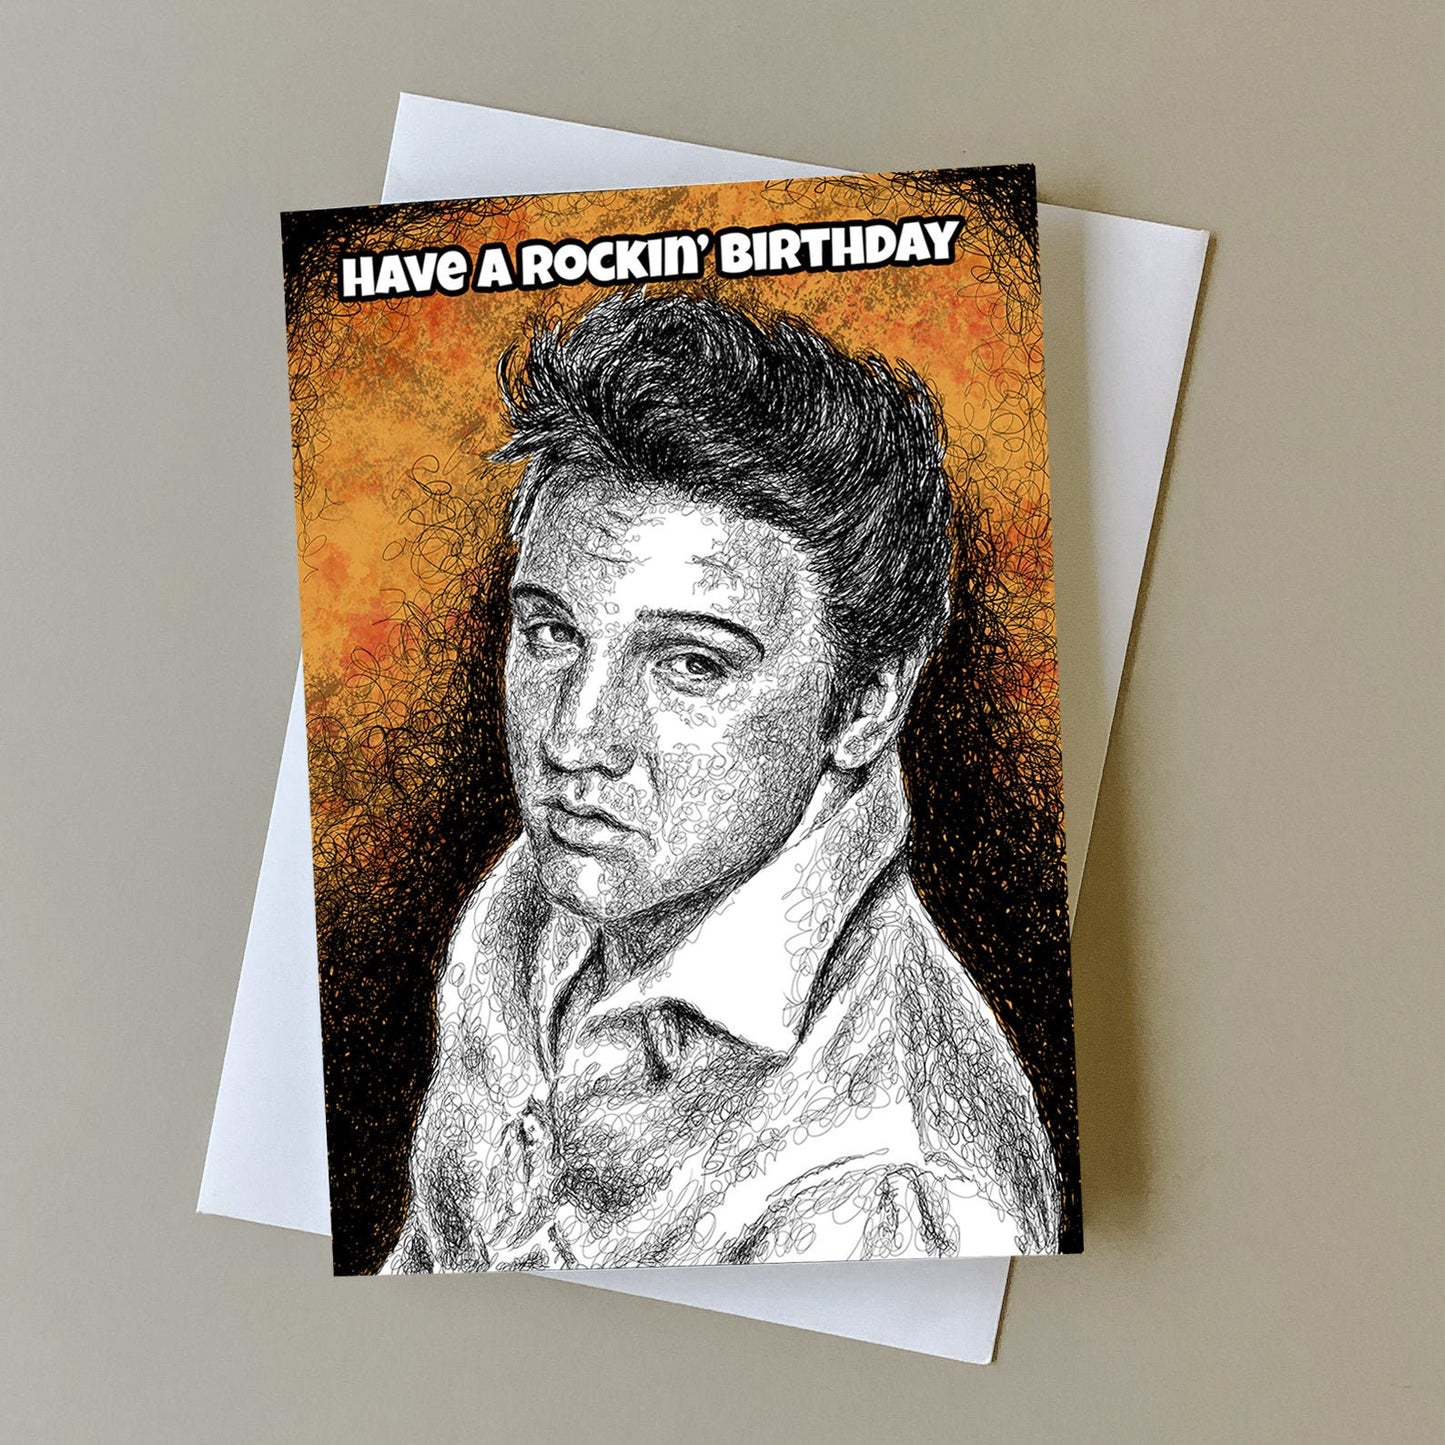 Elvis Presley birthday card, King of Rock and Roll, Rock Music card, Elvis birthday card, Gift for Elvis fans, Have a rockin' birthday